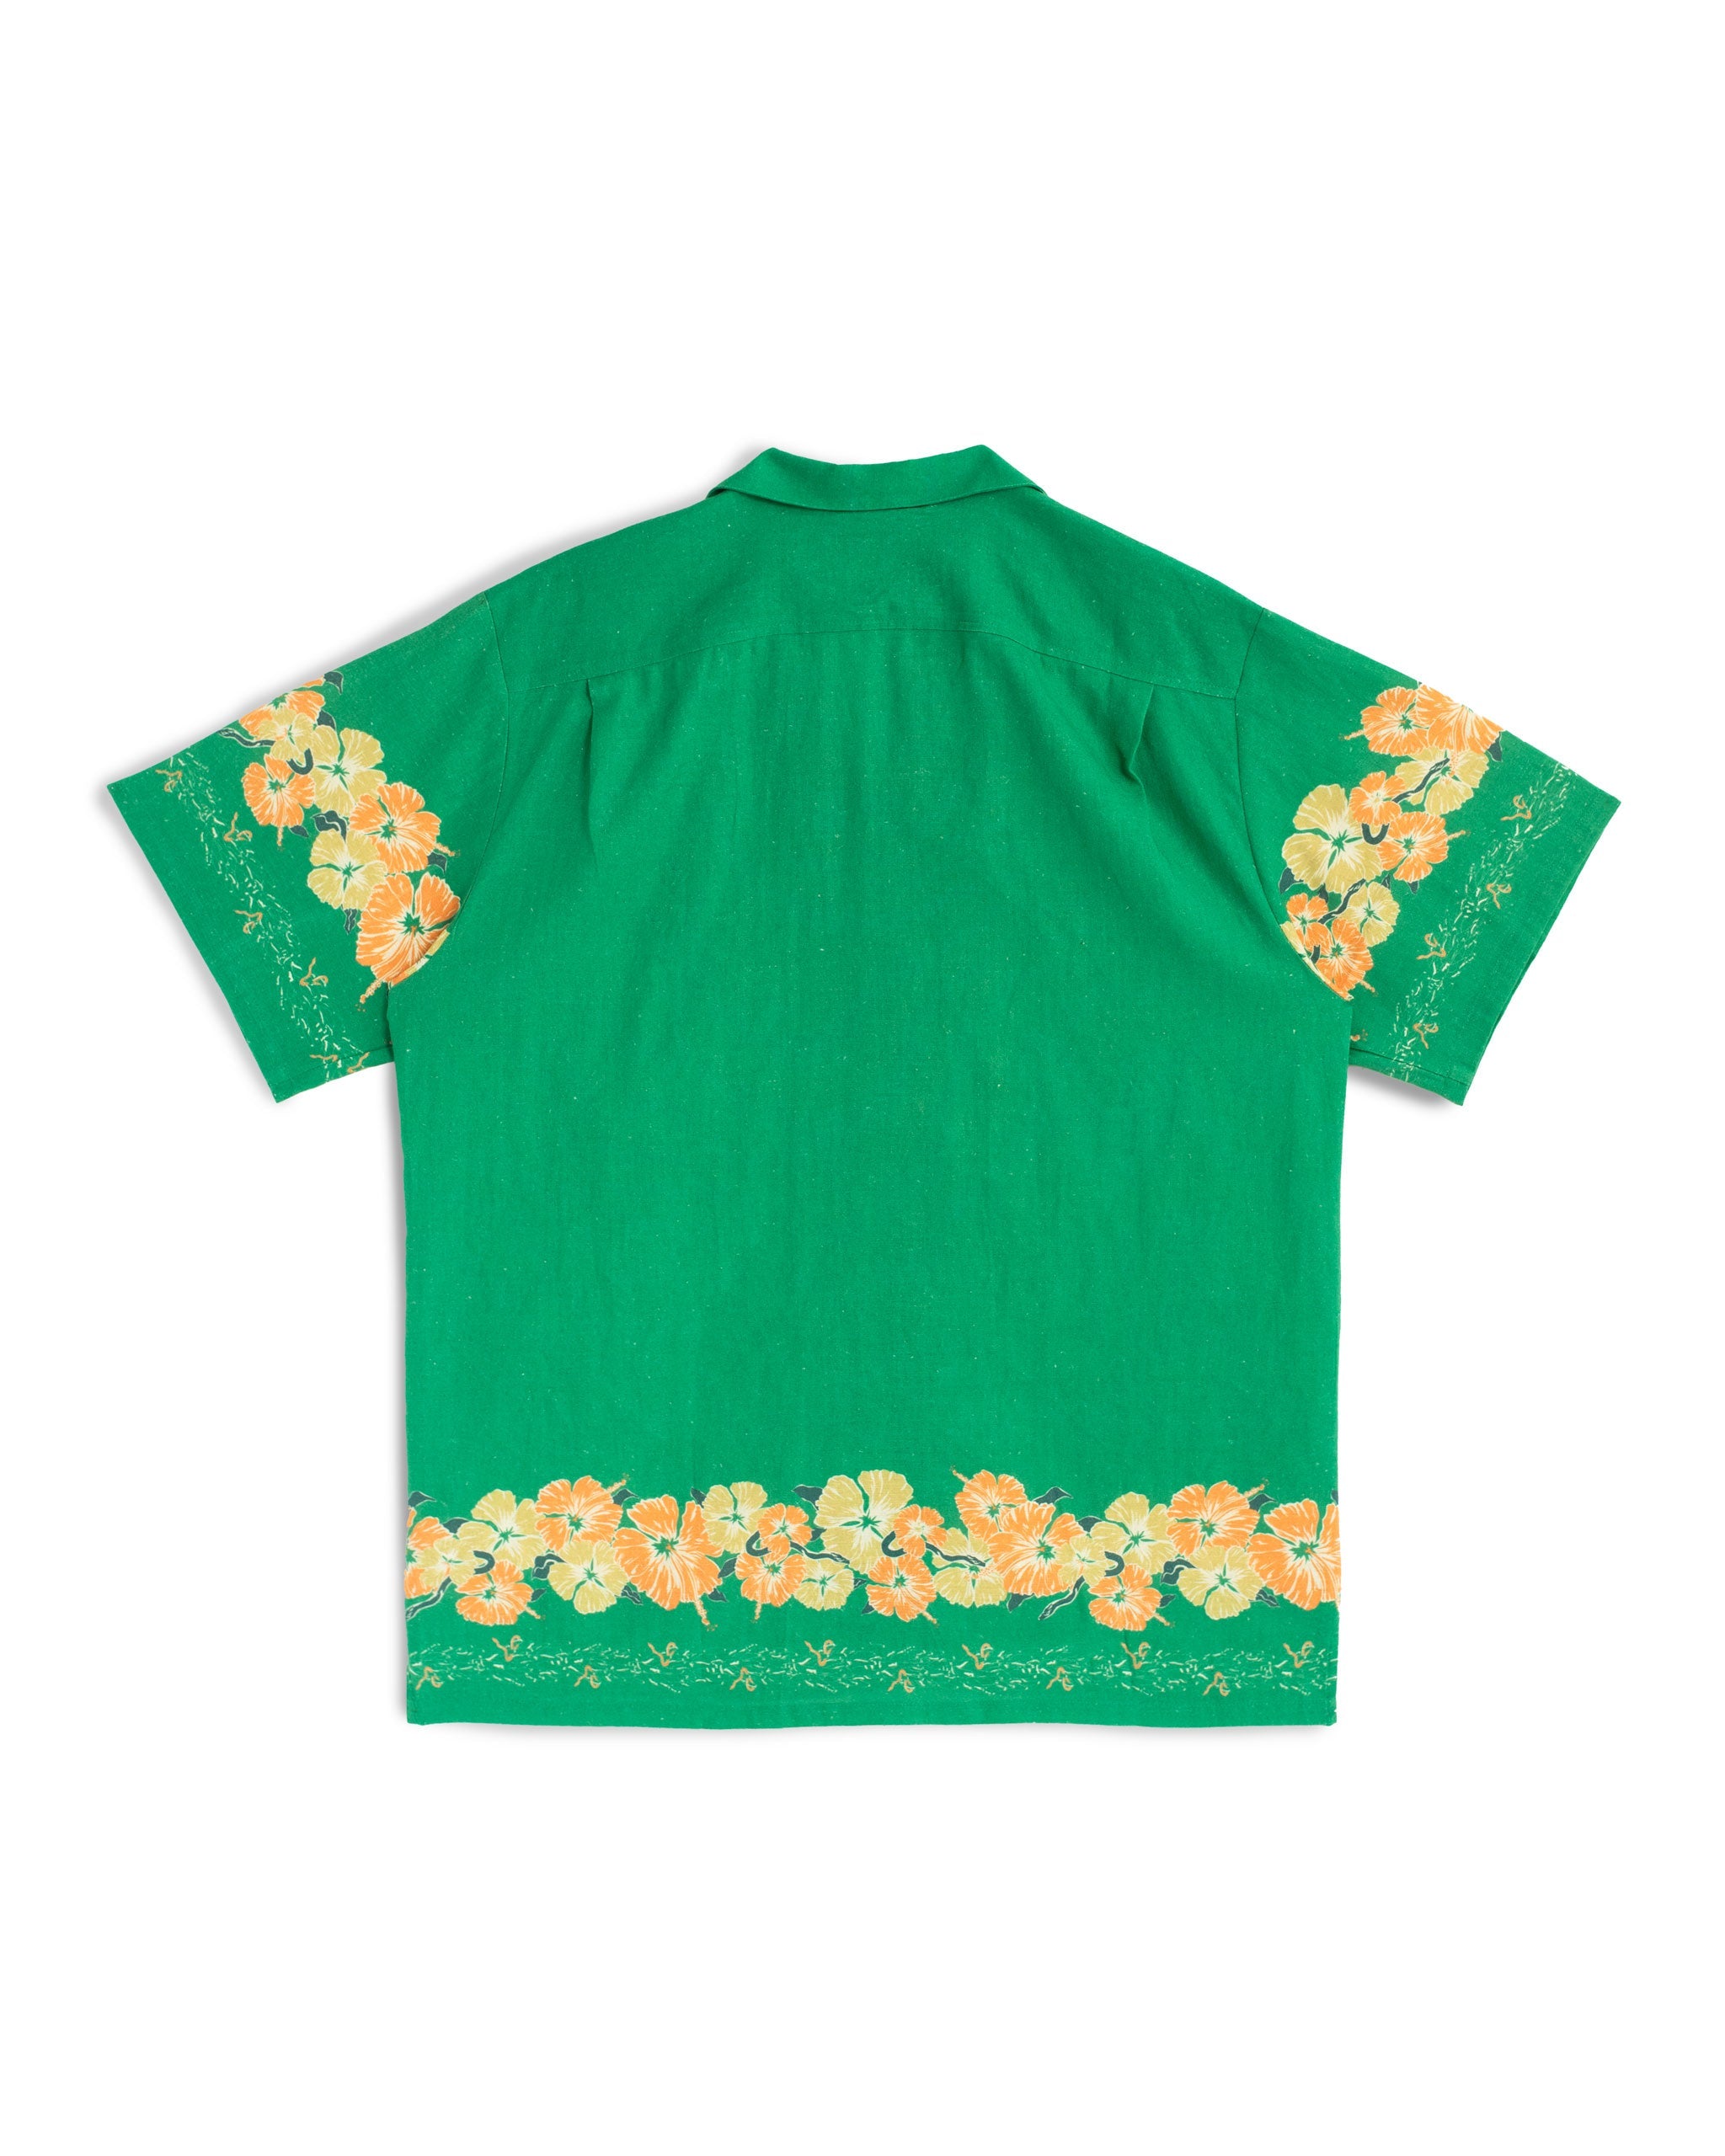 back shot of Green camp shirt with floral motif pattern on the sleeves and bottom hem